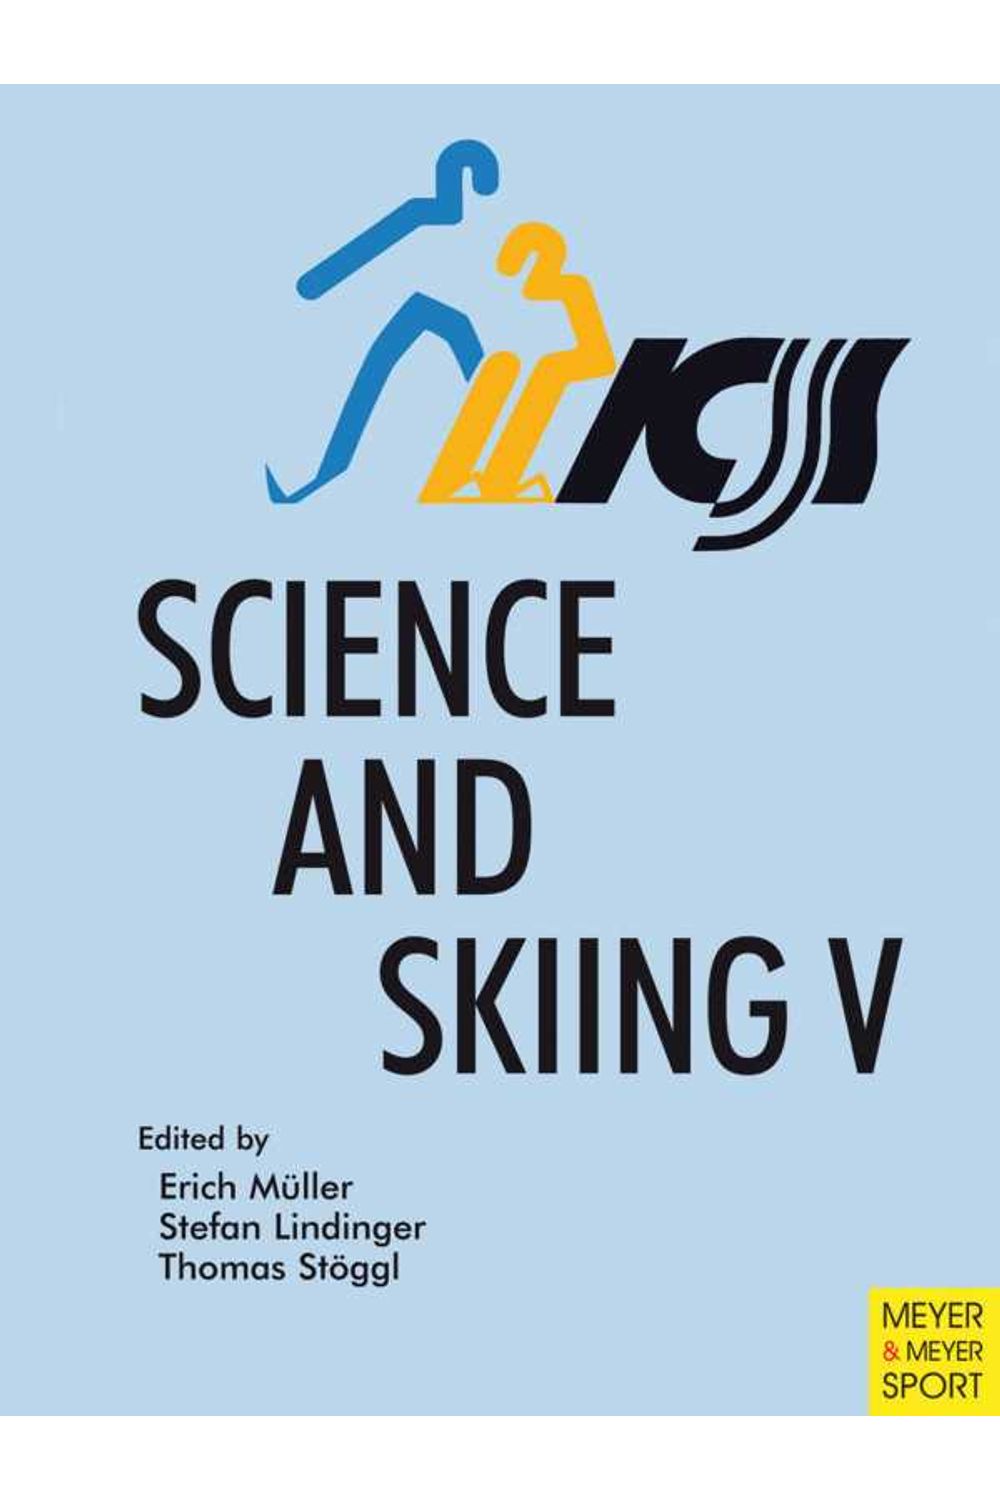 bw-science-and-skiing-v-meyer-meyer-sport-9781841264288